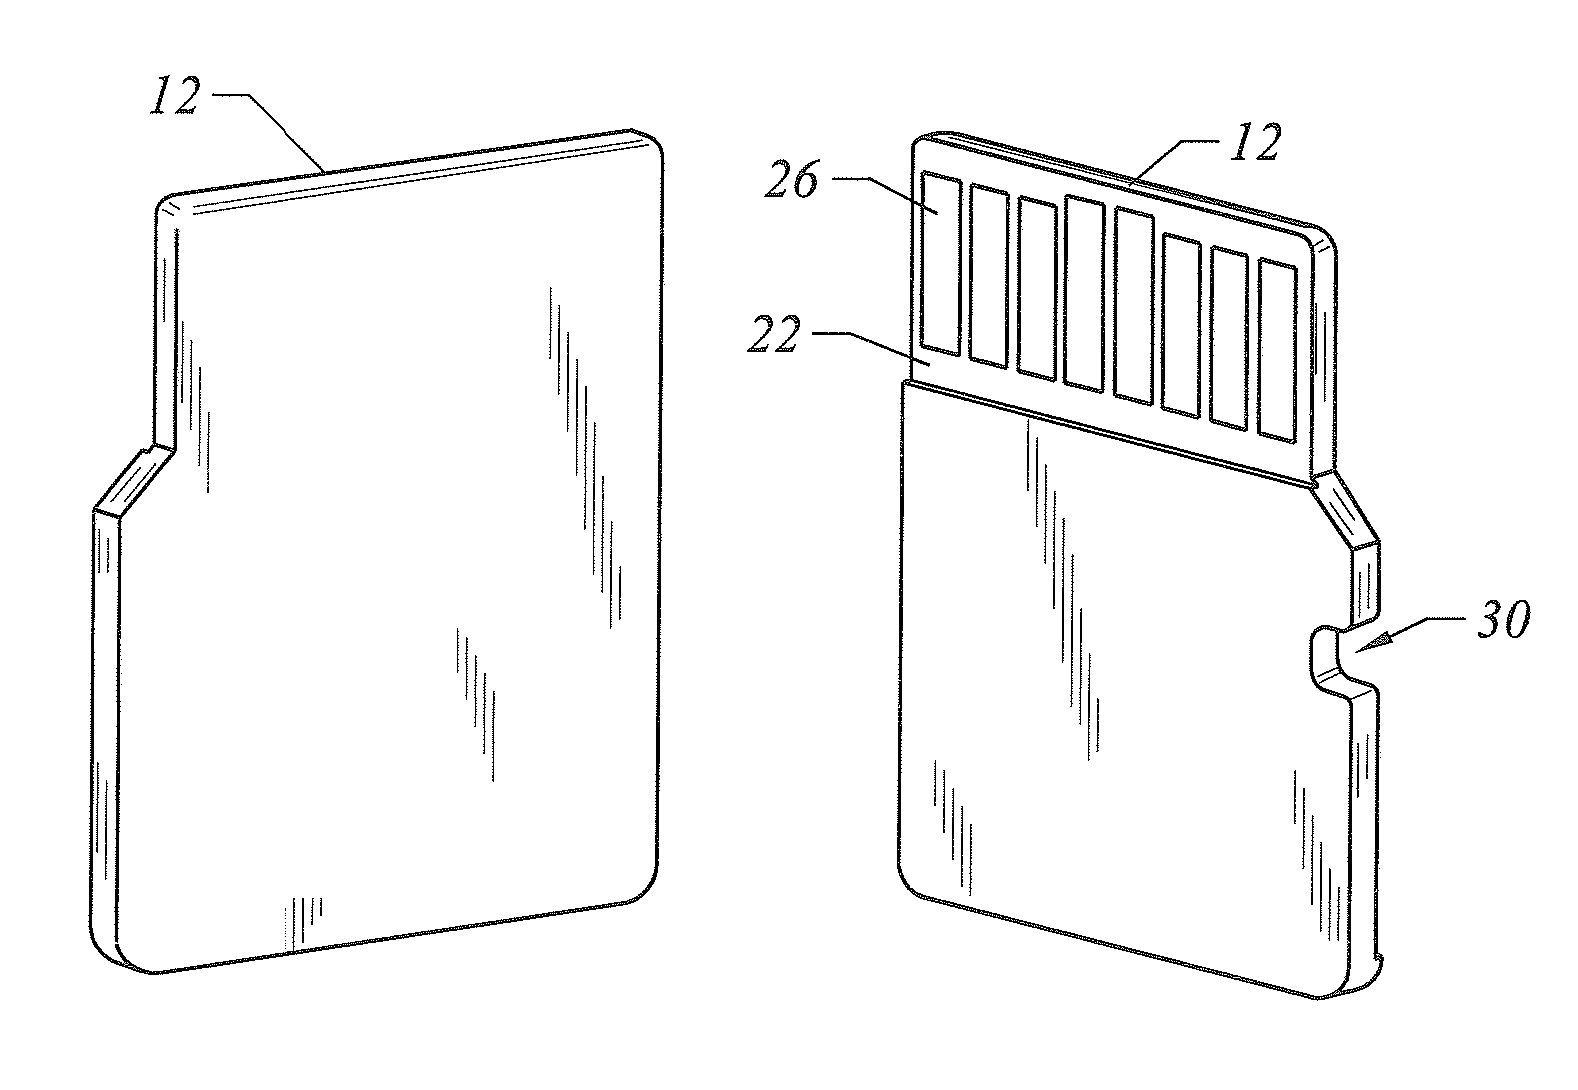 Peripheral card with sloped edges